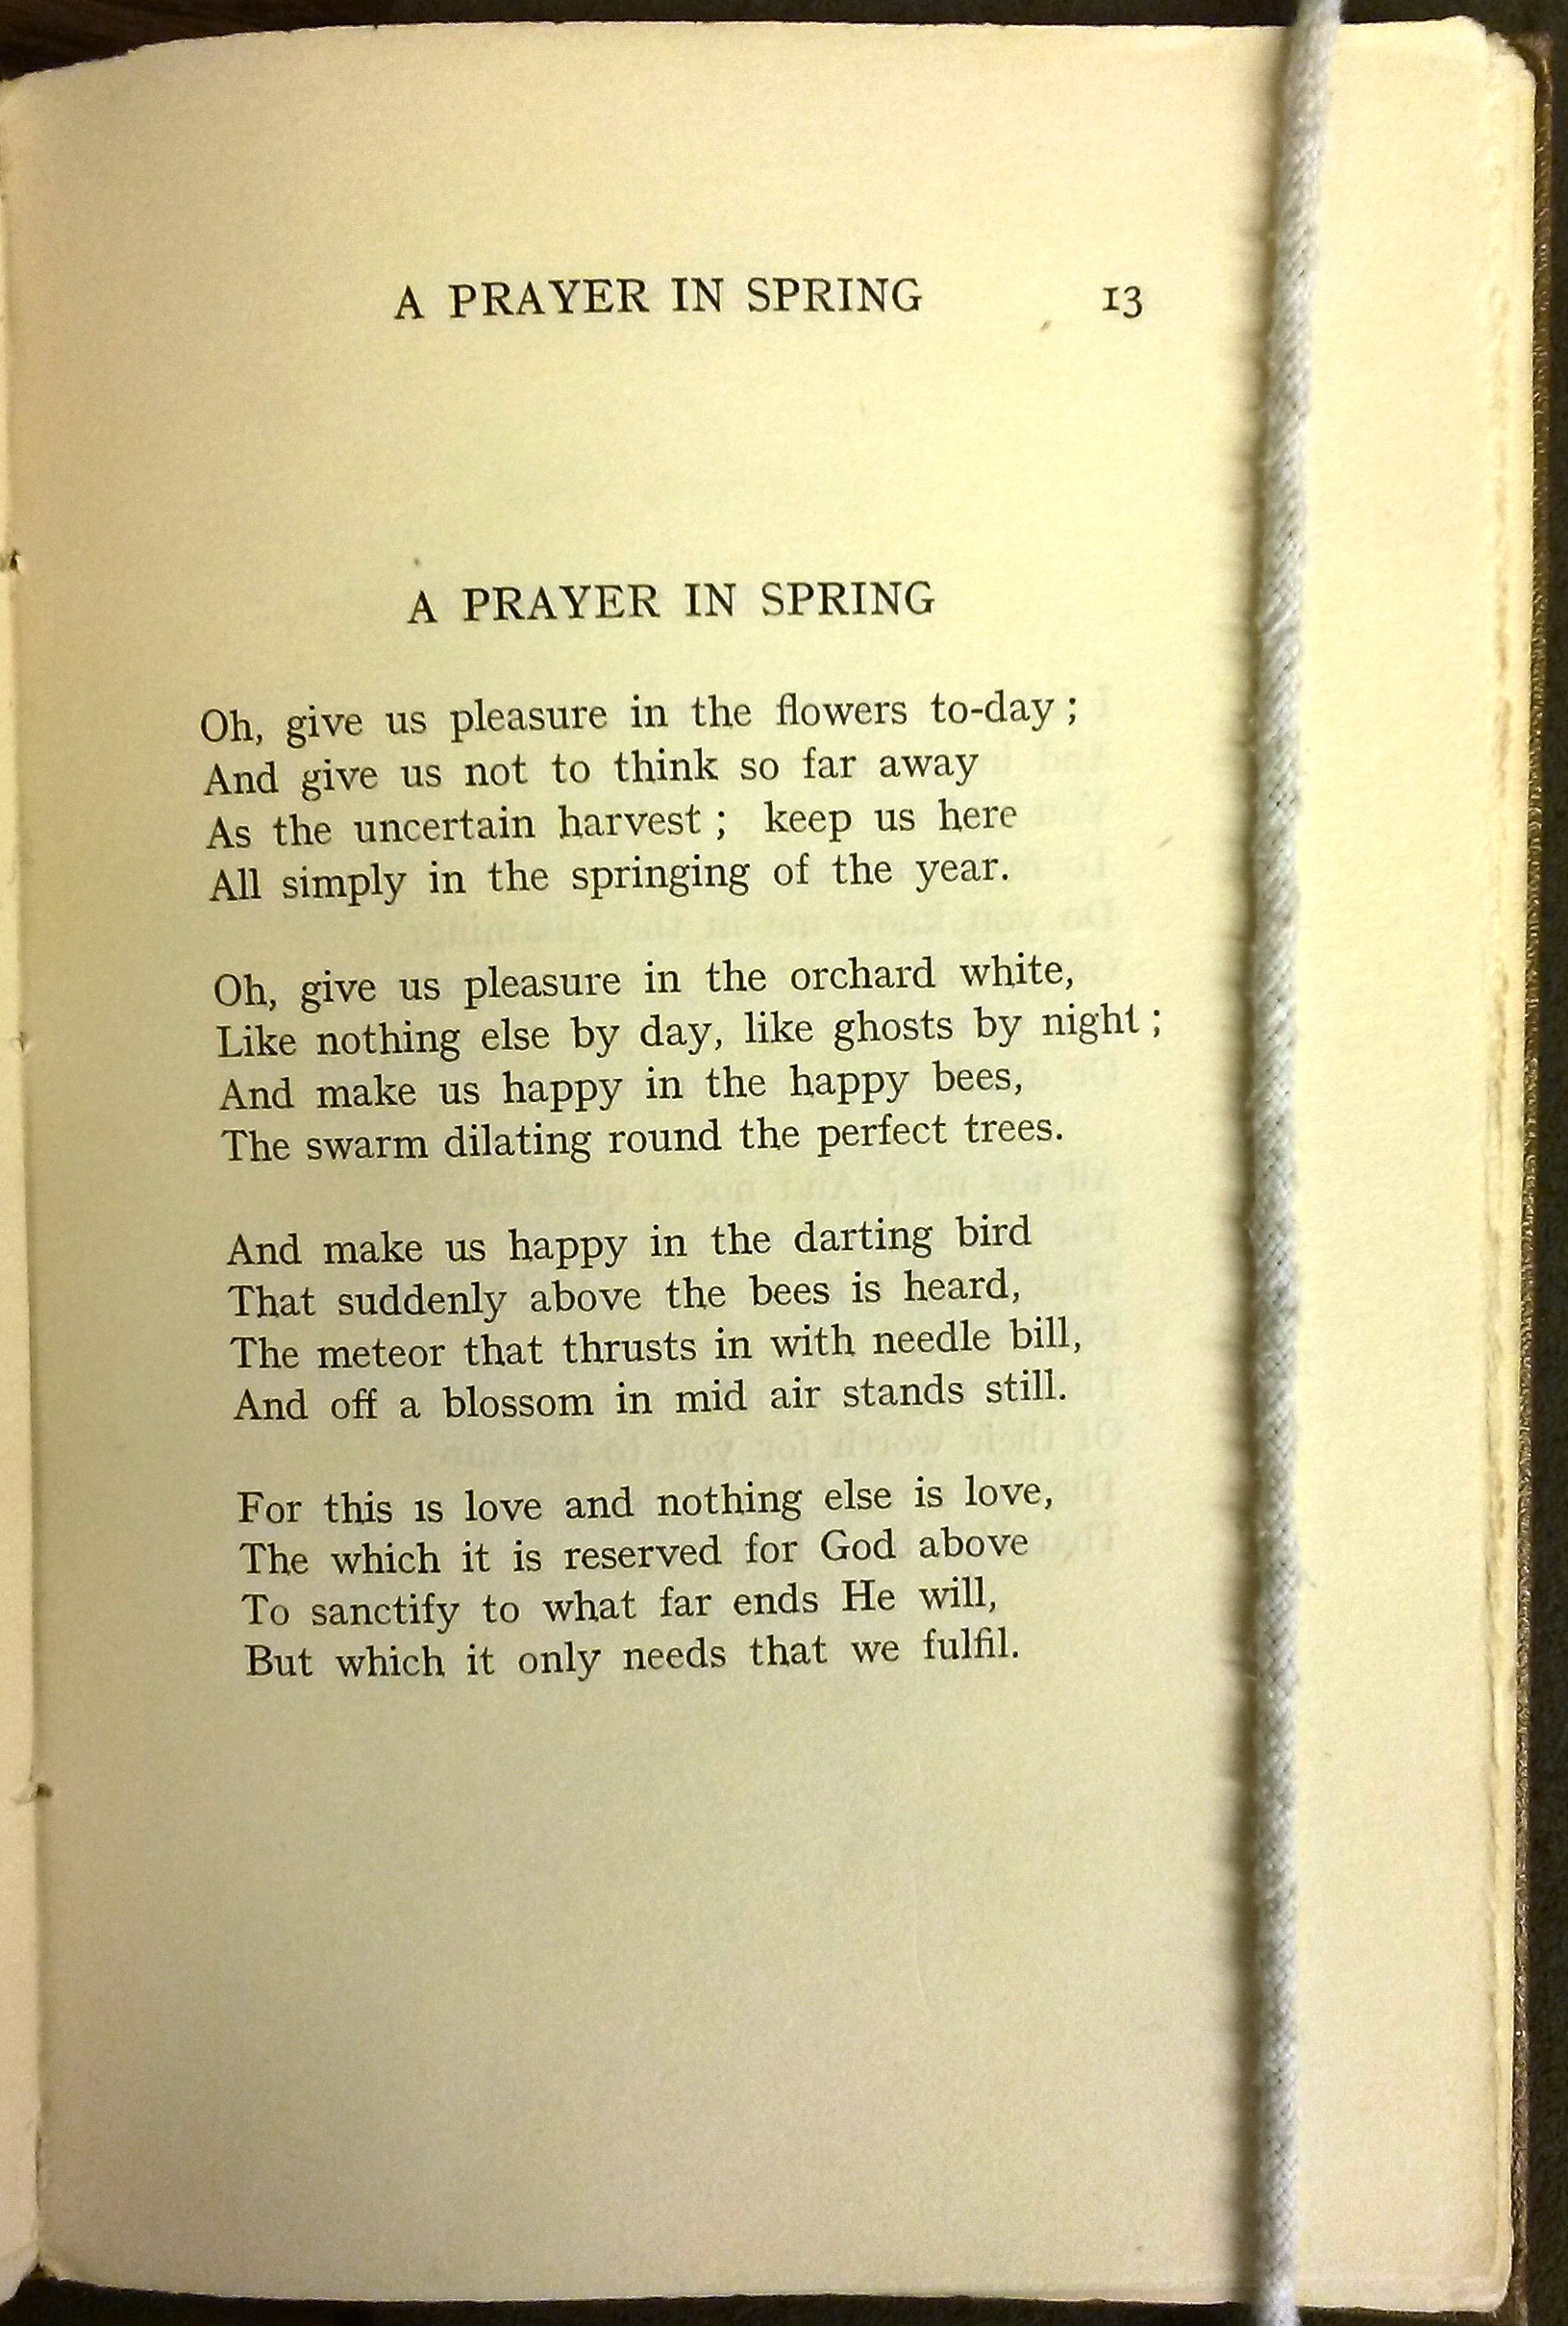 Text of "A Prayer in Spring"